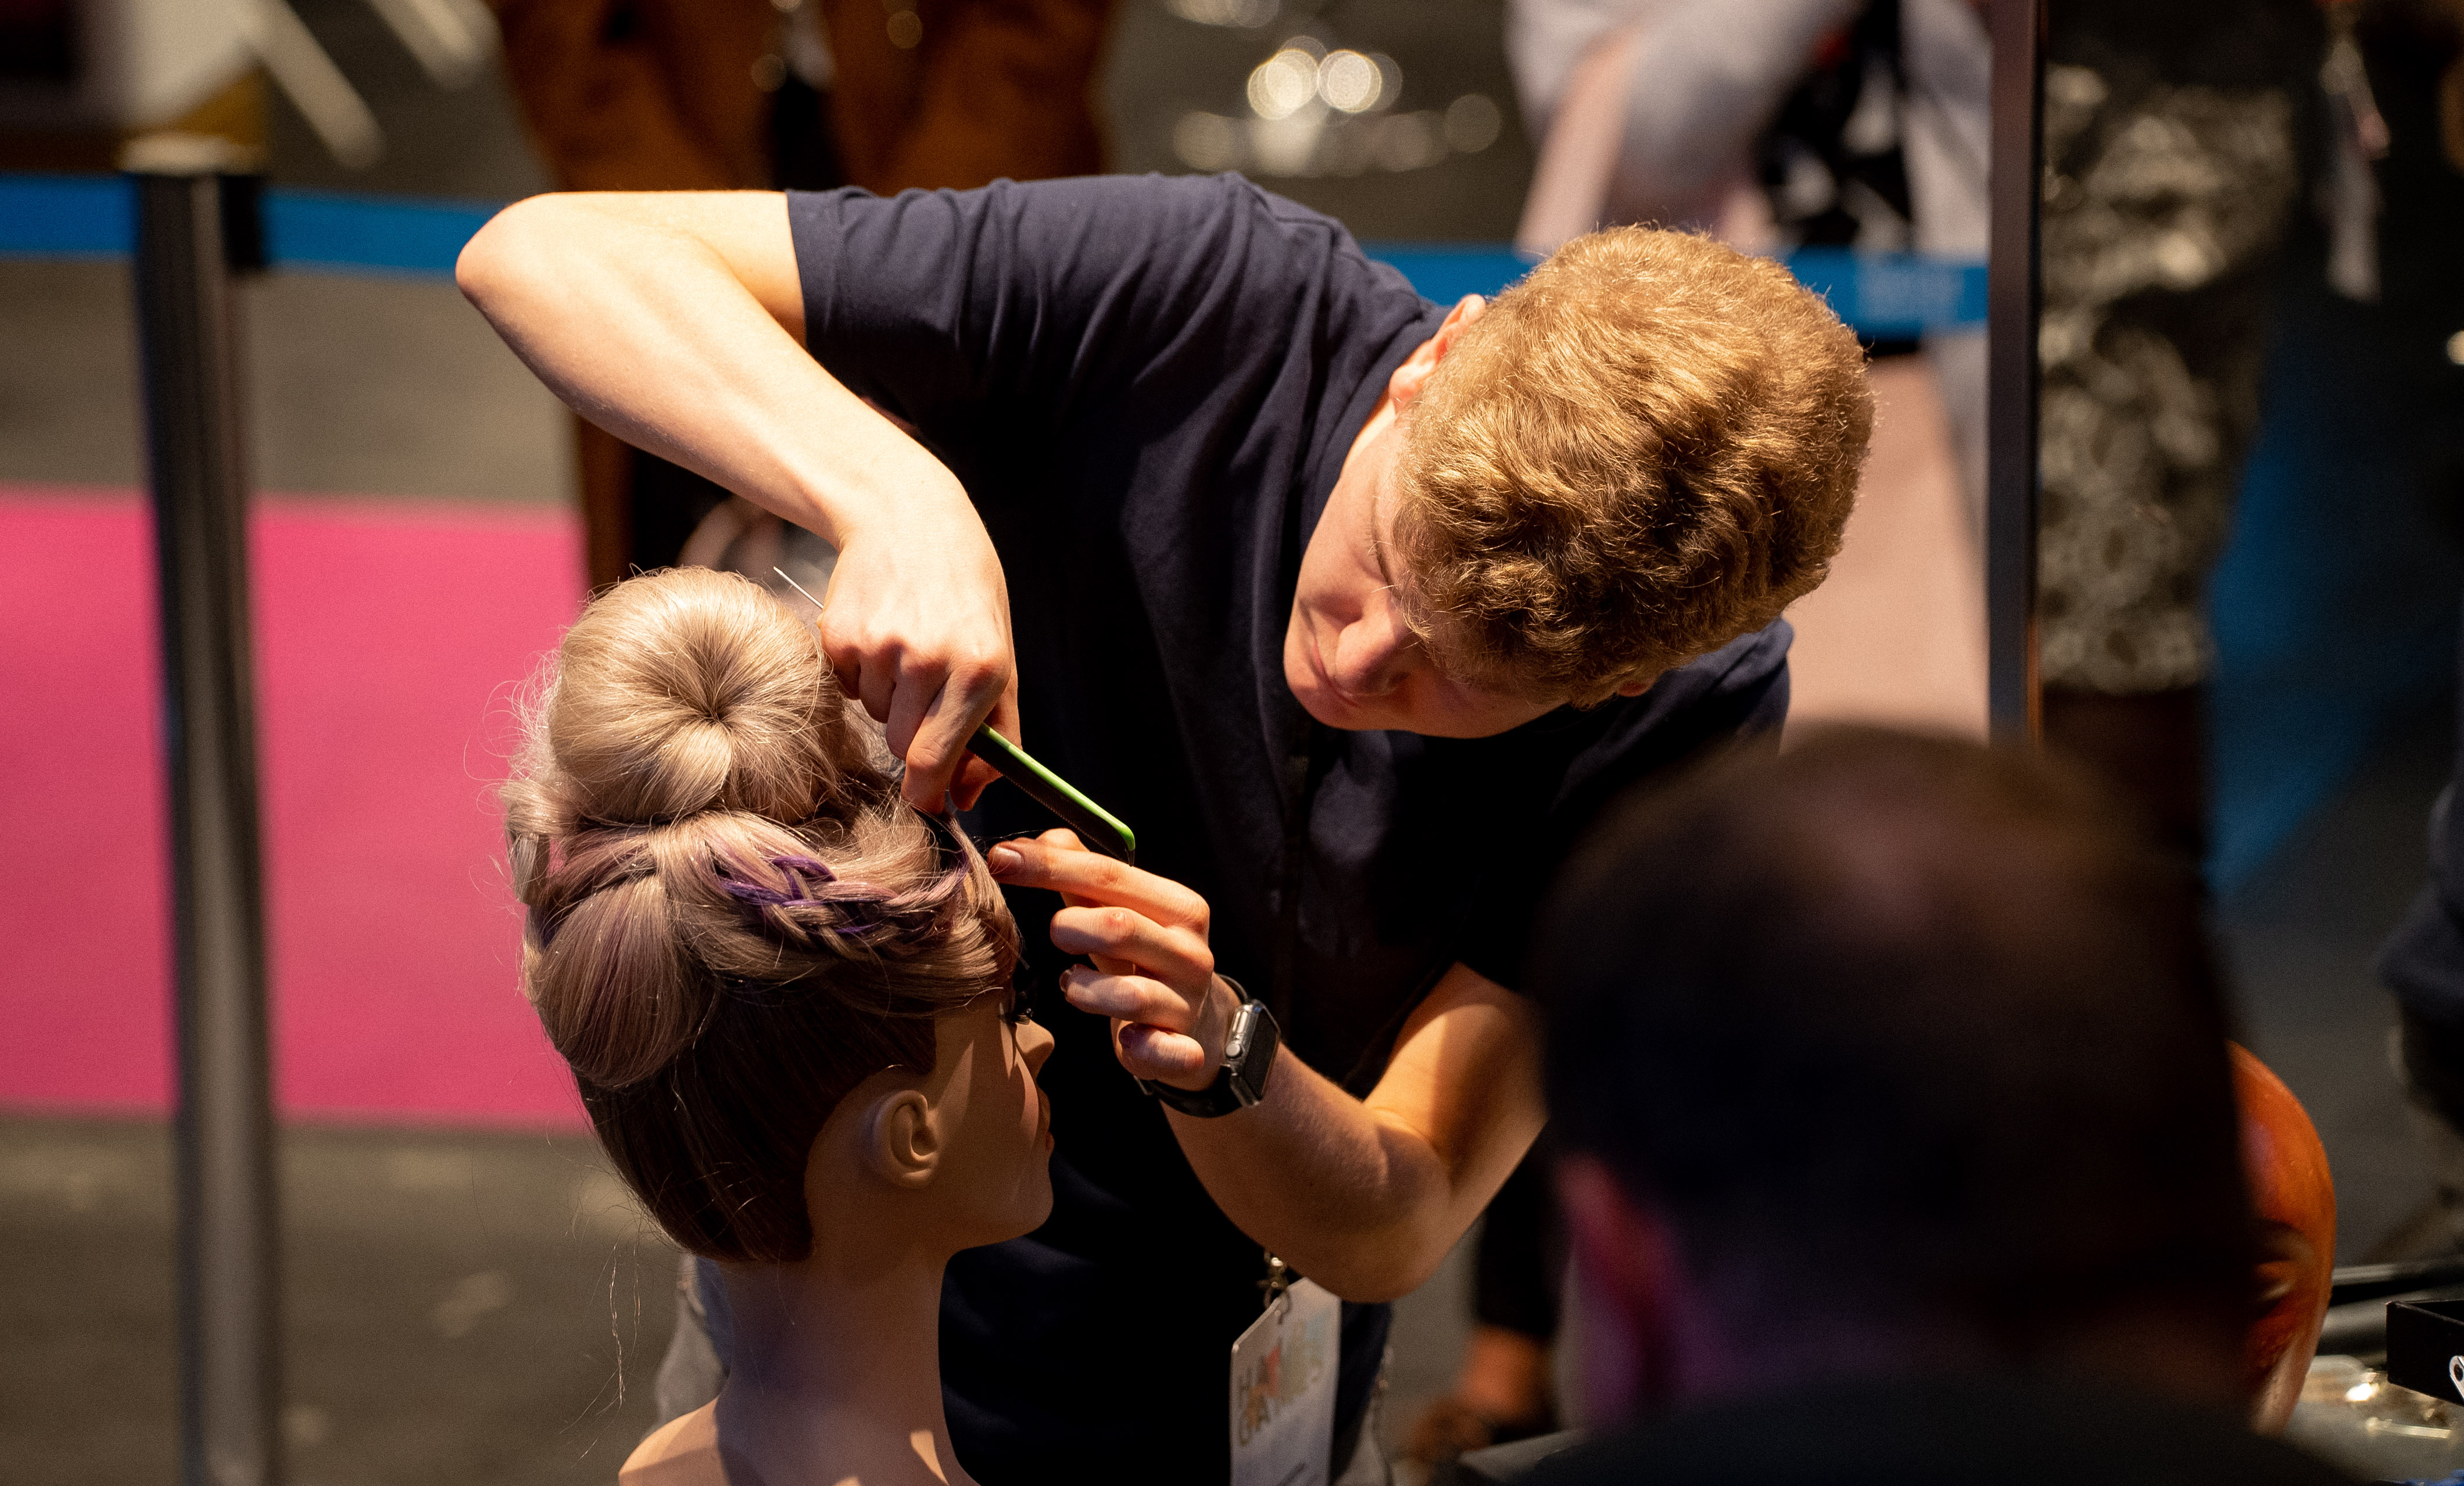 A hairdresser artfully puts hair of the forehead part on a training head, partly an updo can be seen